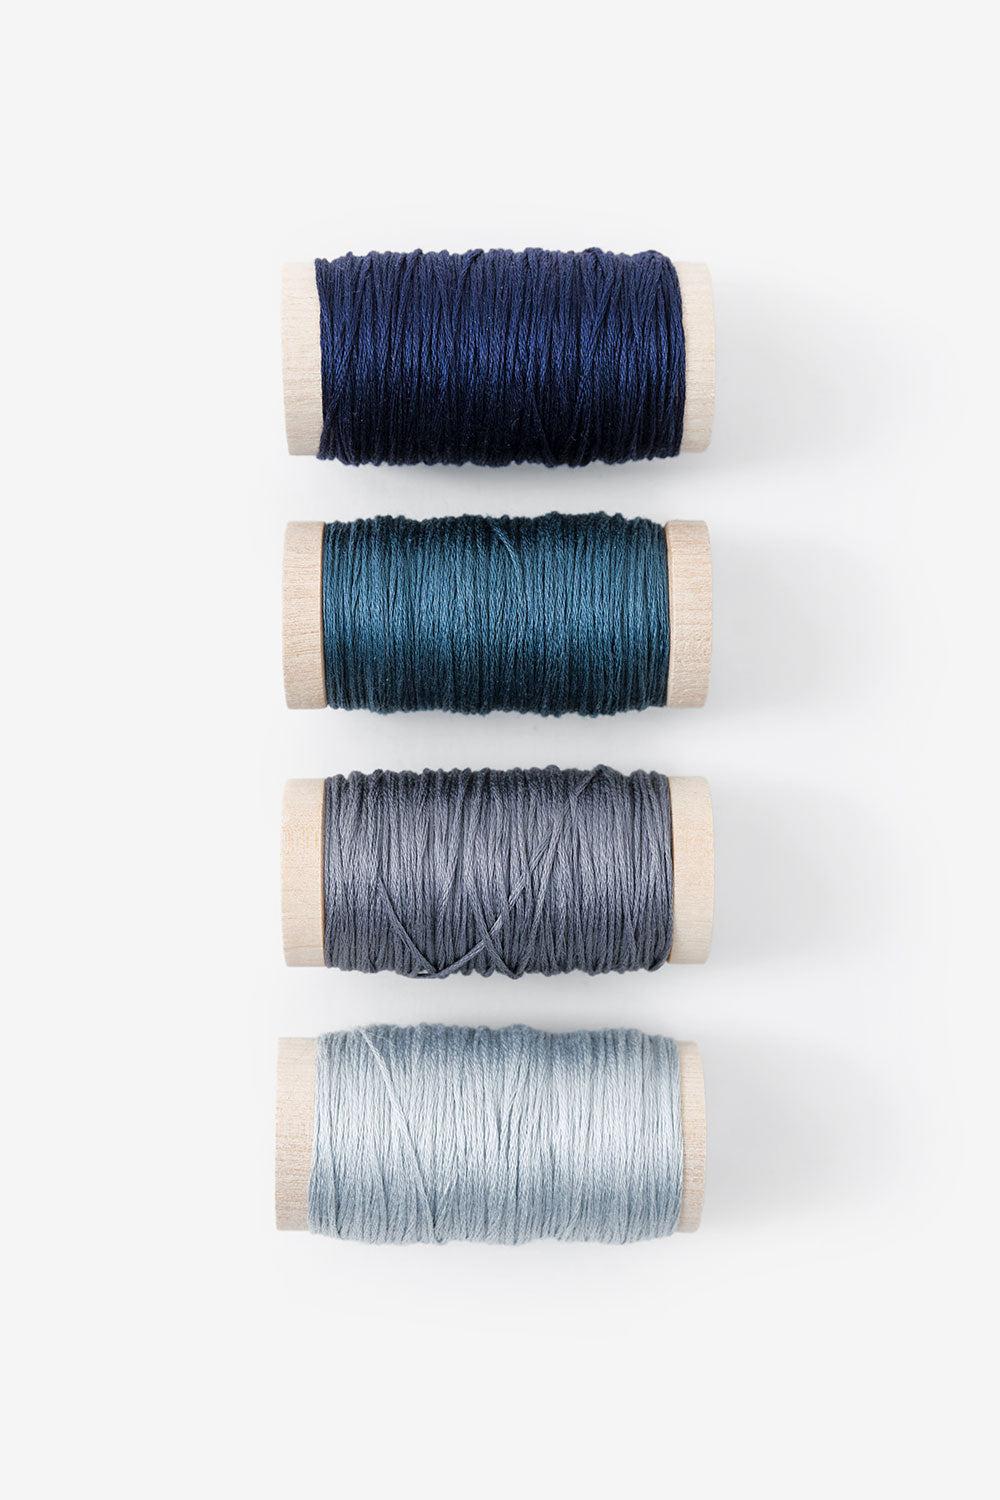 The School of Making Embroidery Floss Bundle for Hand Embroidered DIY Clothing and Making Projects in Shades of Blue.